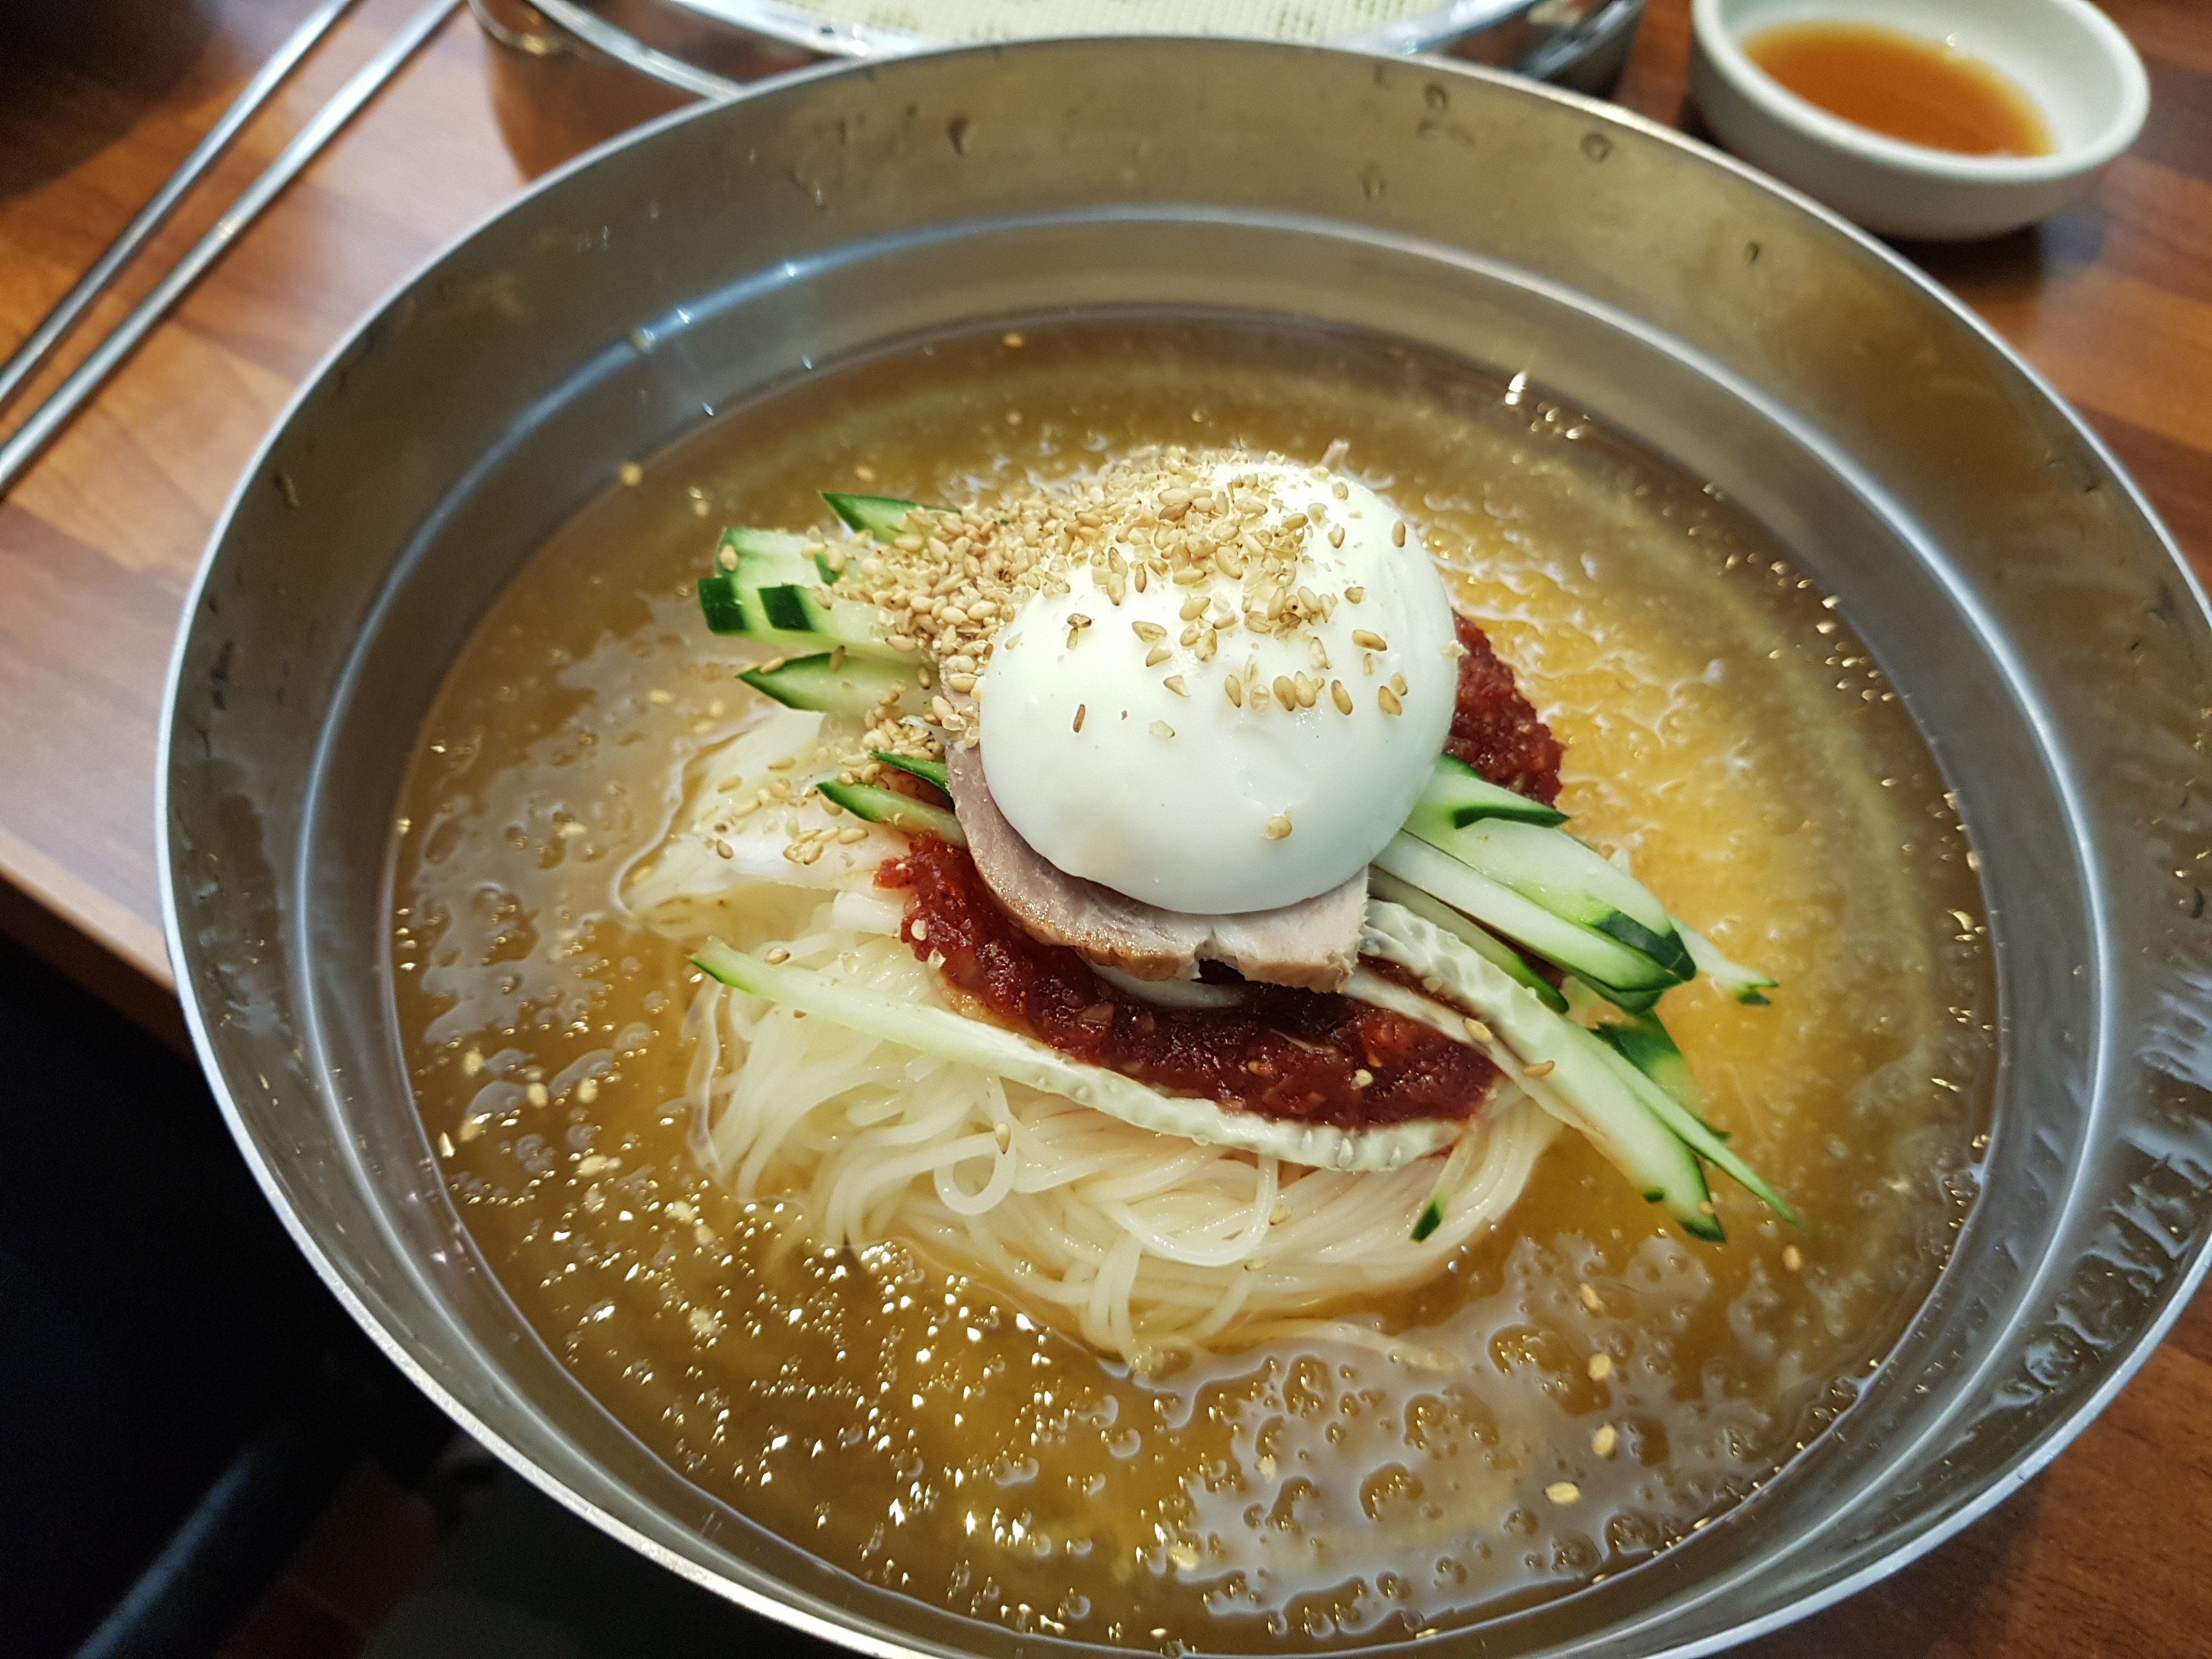 Busan’s signature cold wheat noodle dish was invented by refugees who fled North Korea during the Korean war. Decades later, the dish represents the homeland that many with North Korean heritage long to return to but cannot visit. Photo: Shutterstock